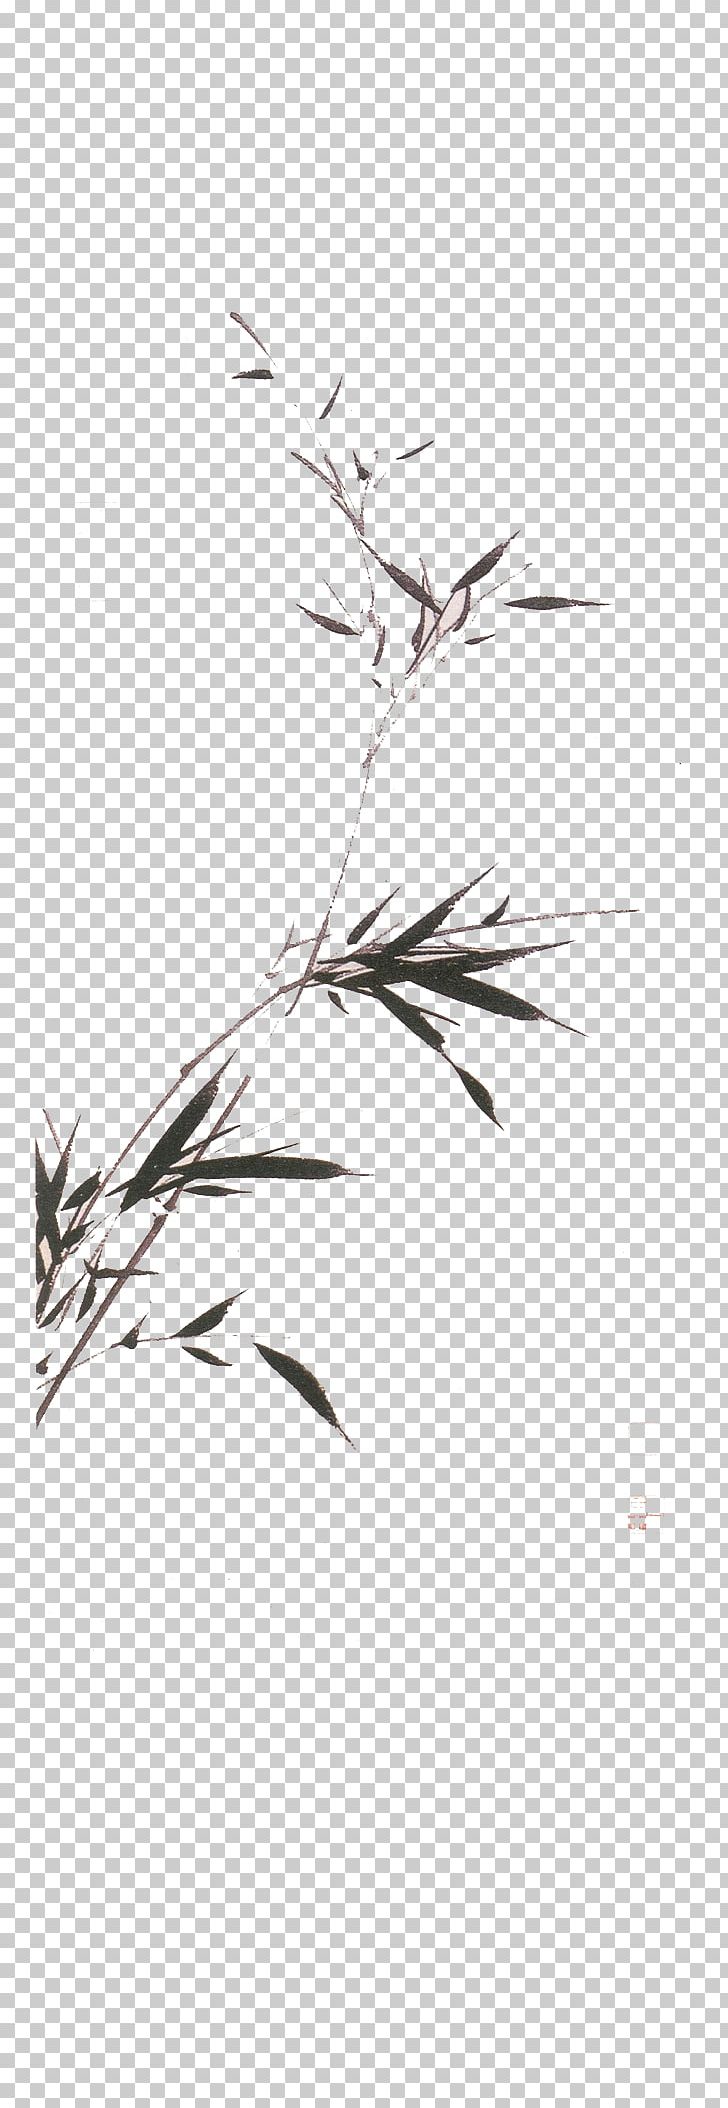 China Bamboo Frank Van Haaren Bamboe India Ink PNG, Clipart, Bamboo Leaves, Black, Black Color, Branch, Chinese Lantern Free PNG Download